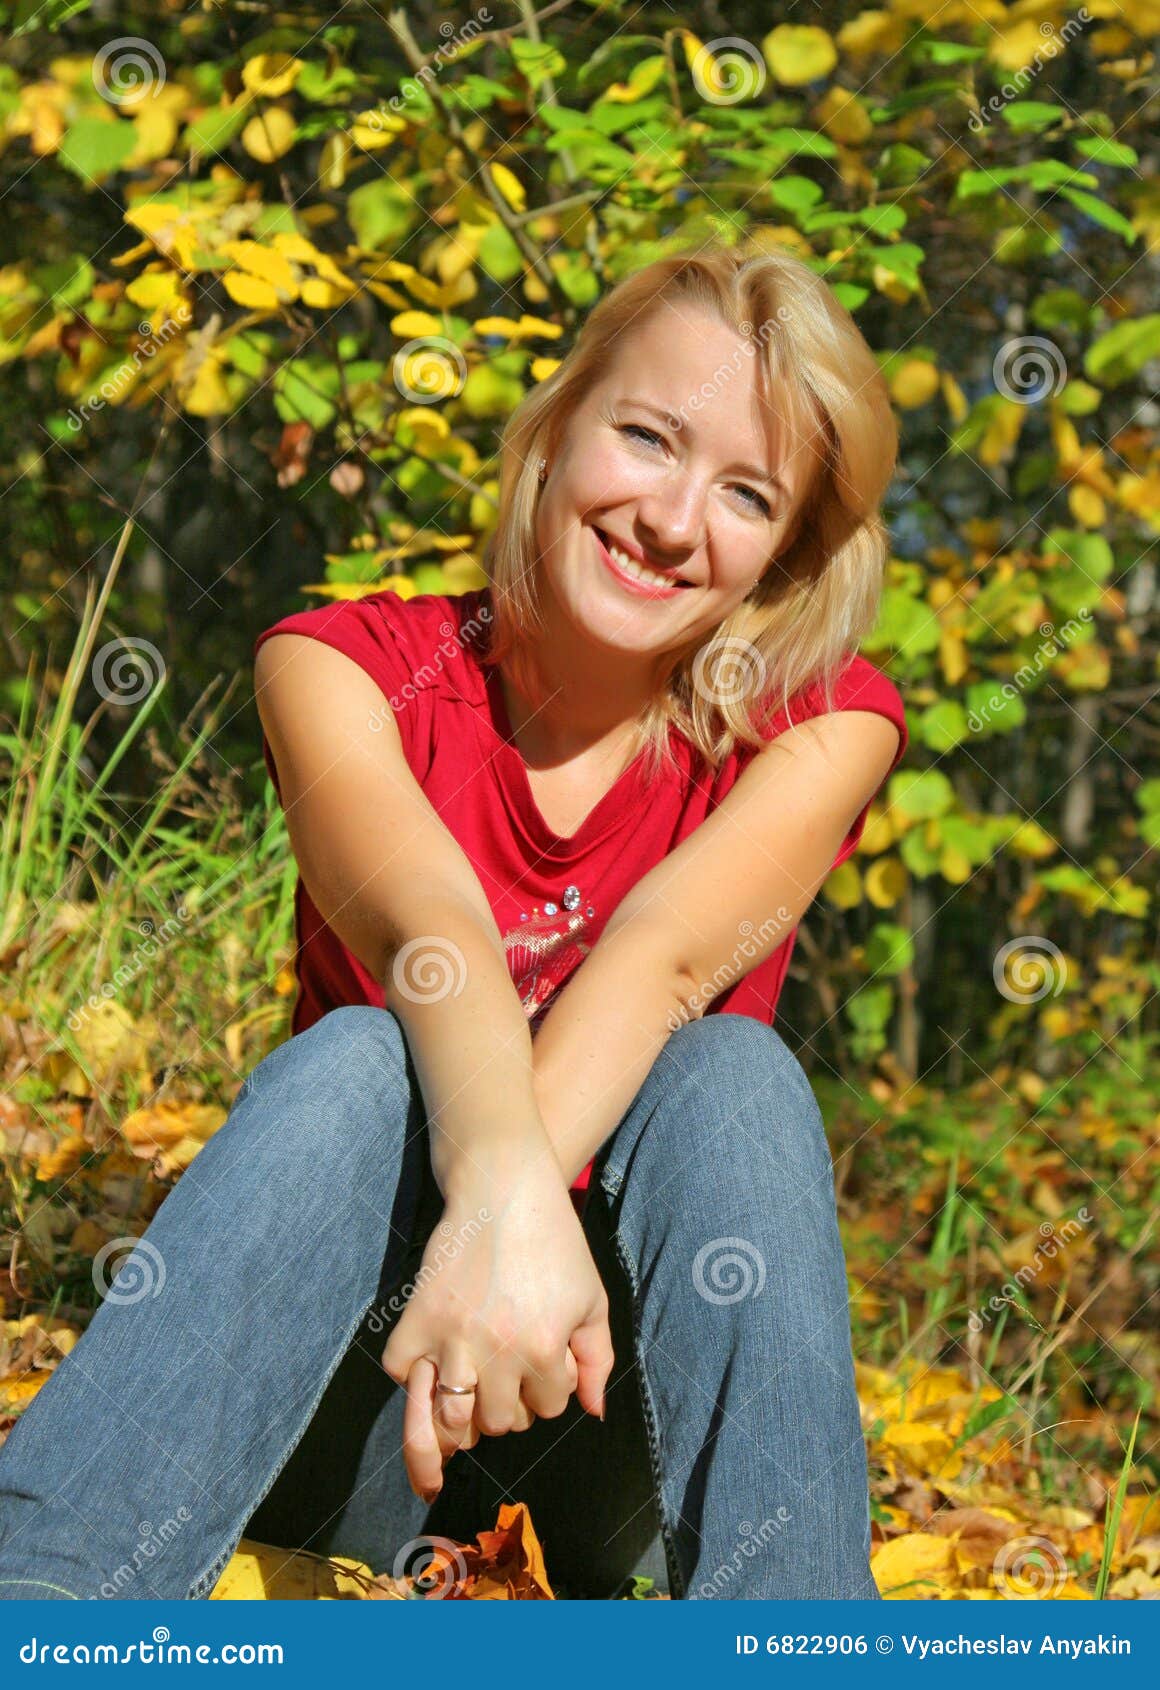 The beautiful girl smiles stock photo. Image of color - 6822906